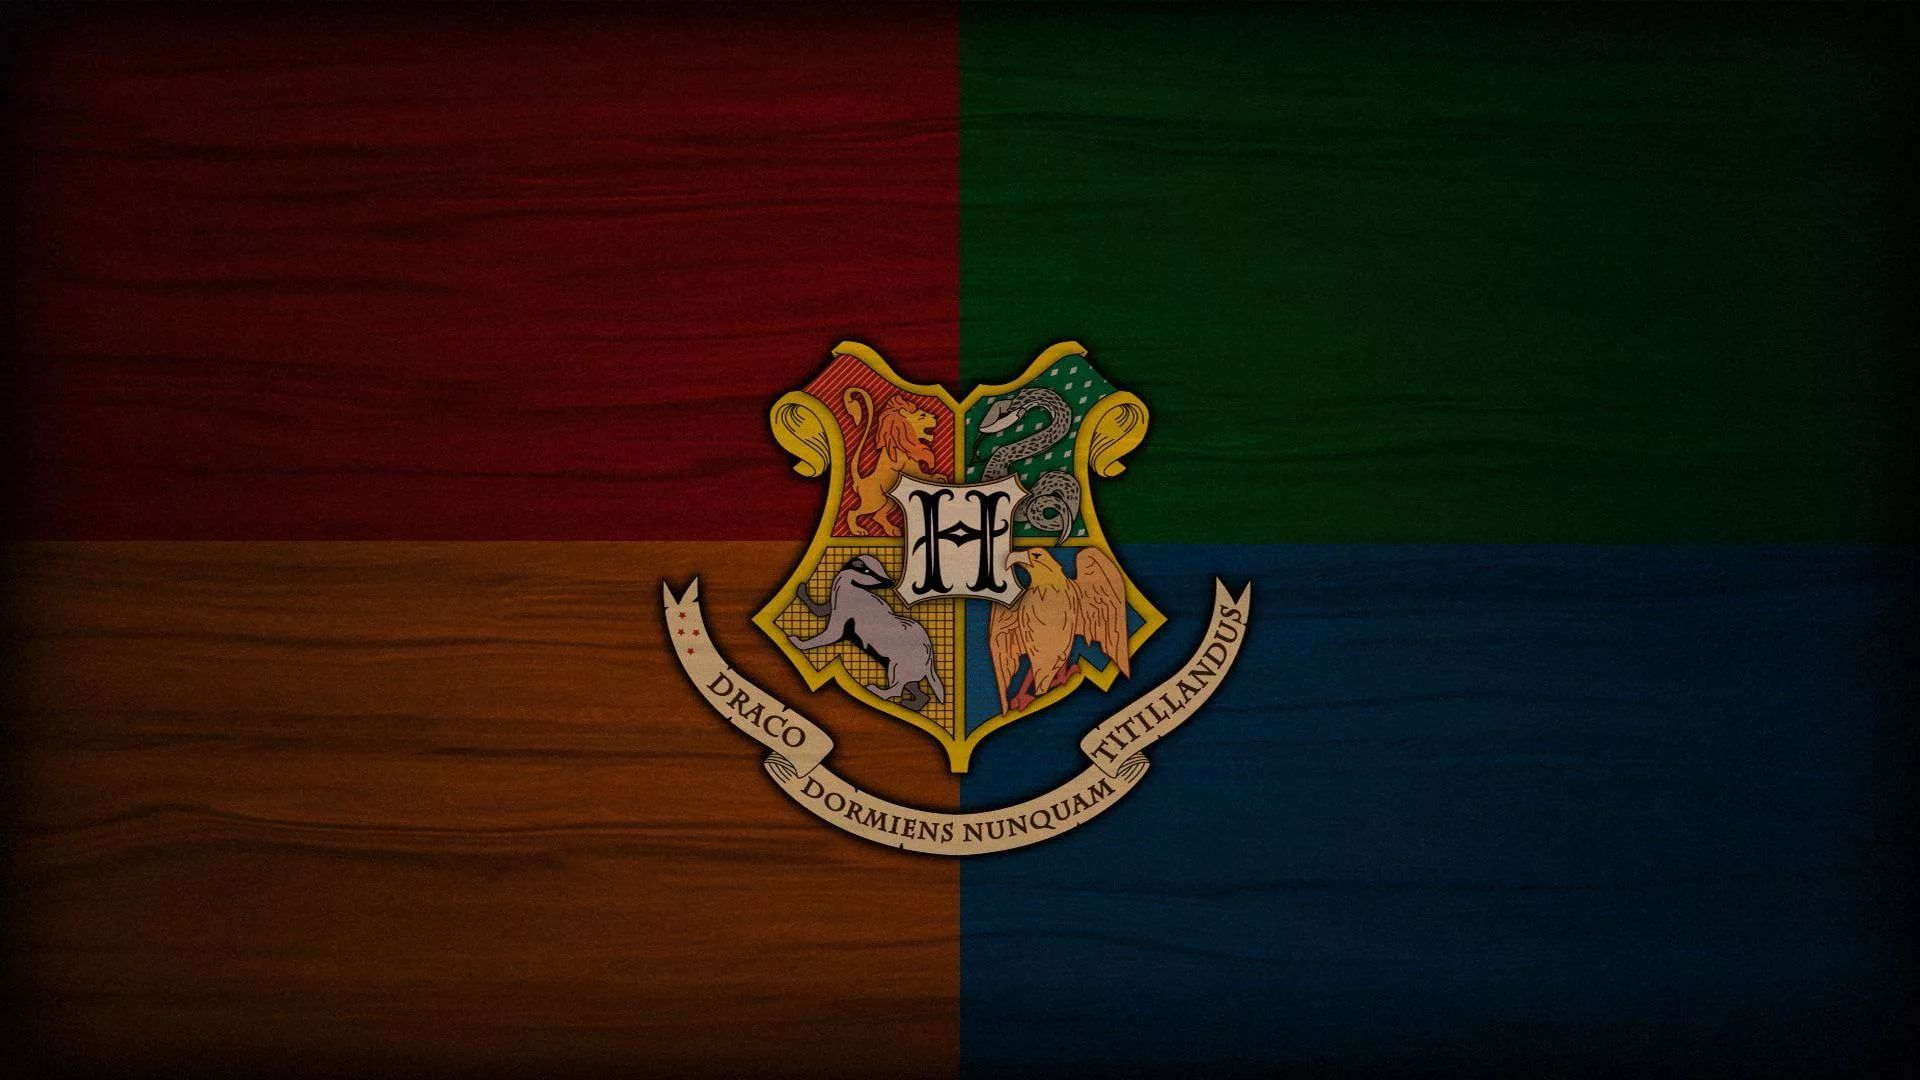 Slytherin Logo Wallpapers